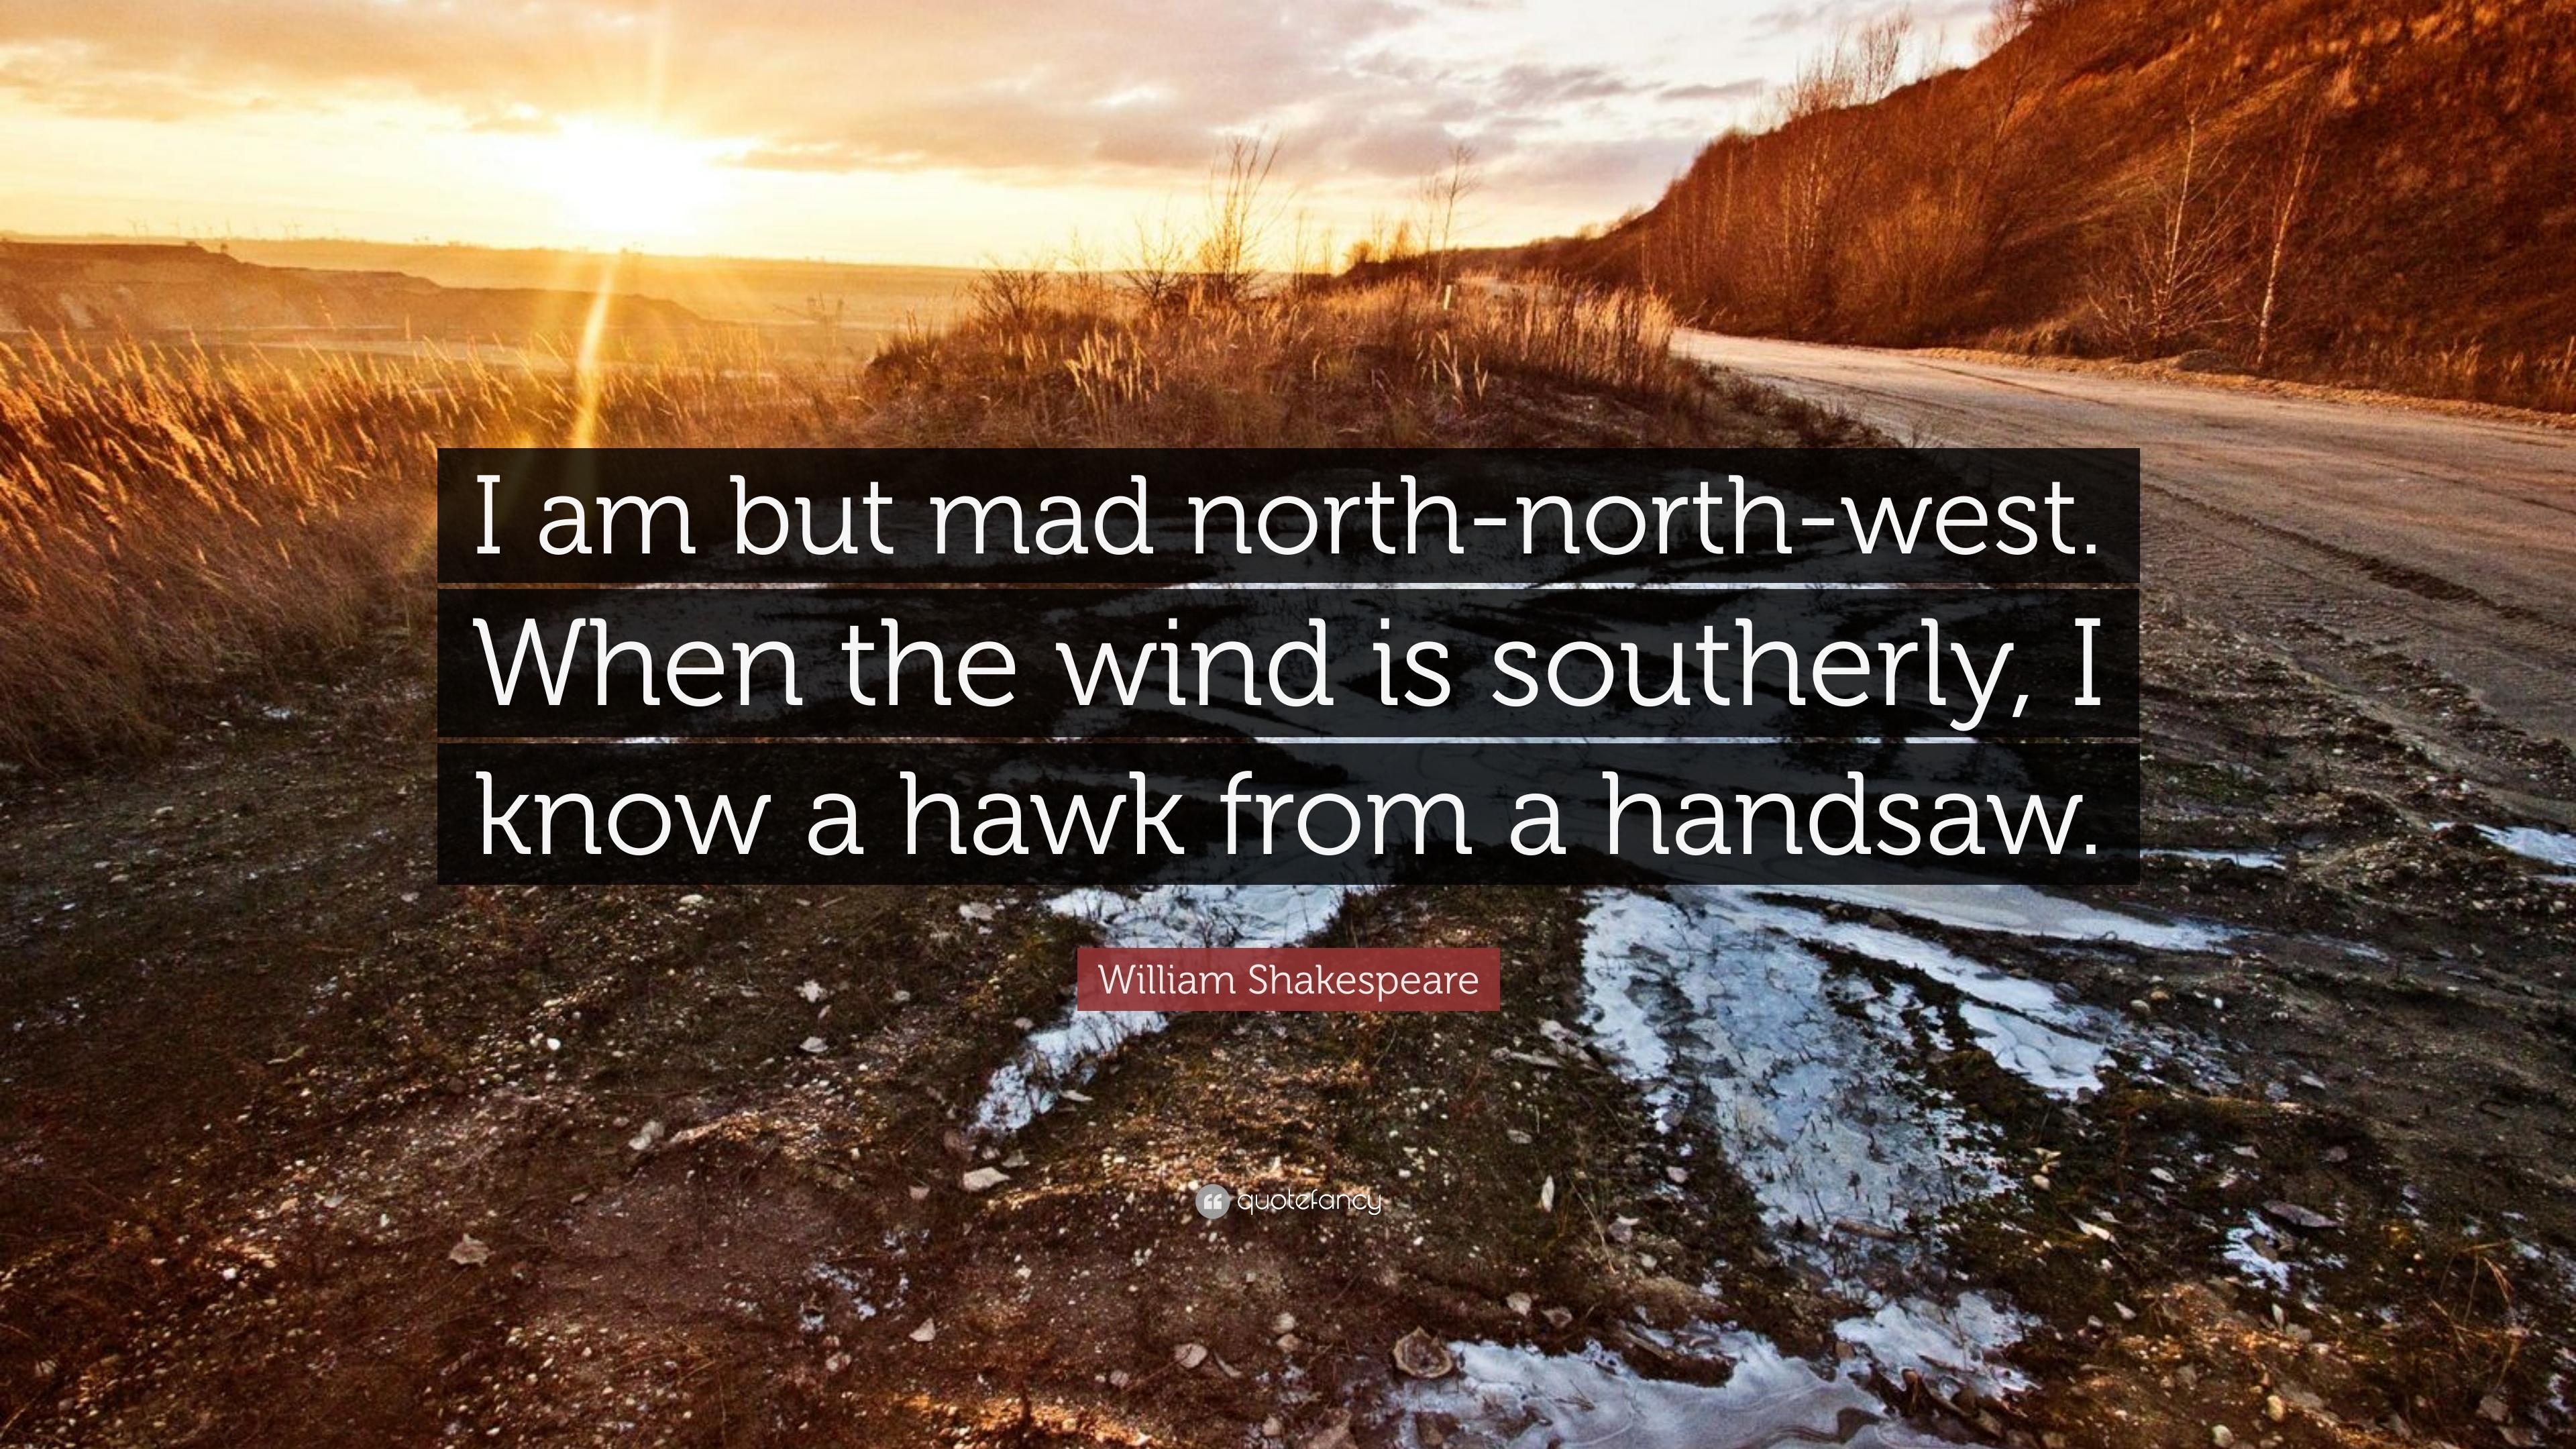 William Shakespeare Quote: “I Am But Mad North North West. When